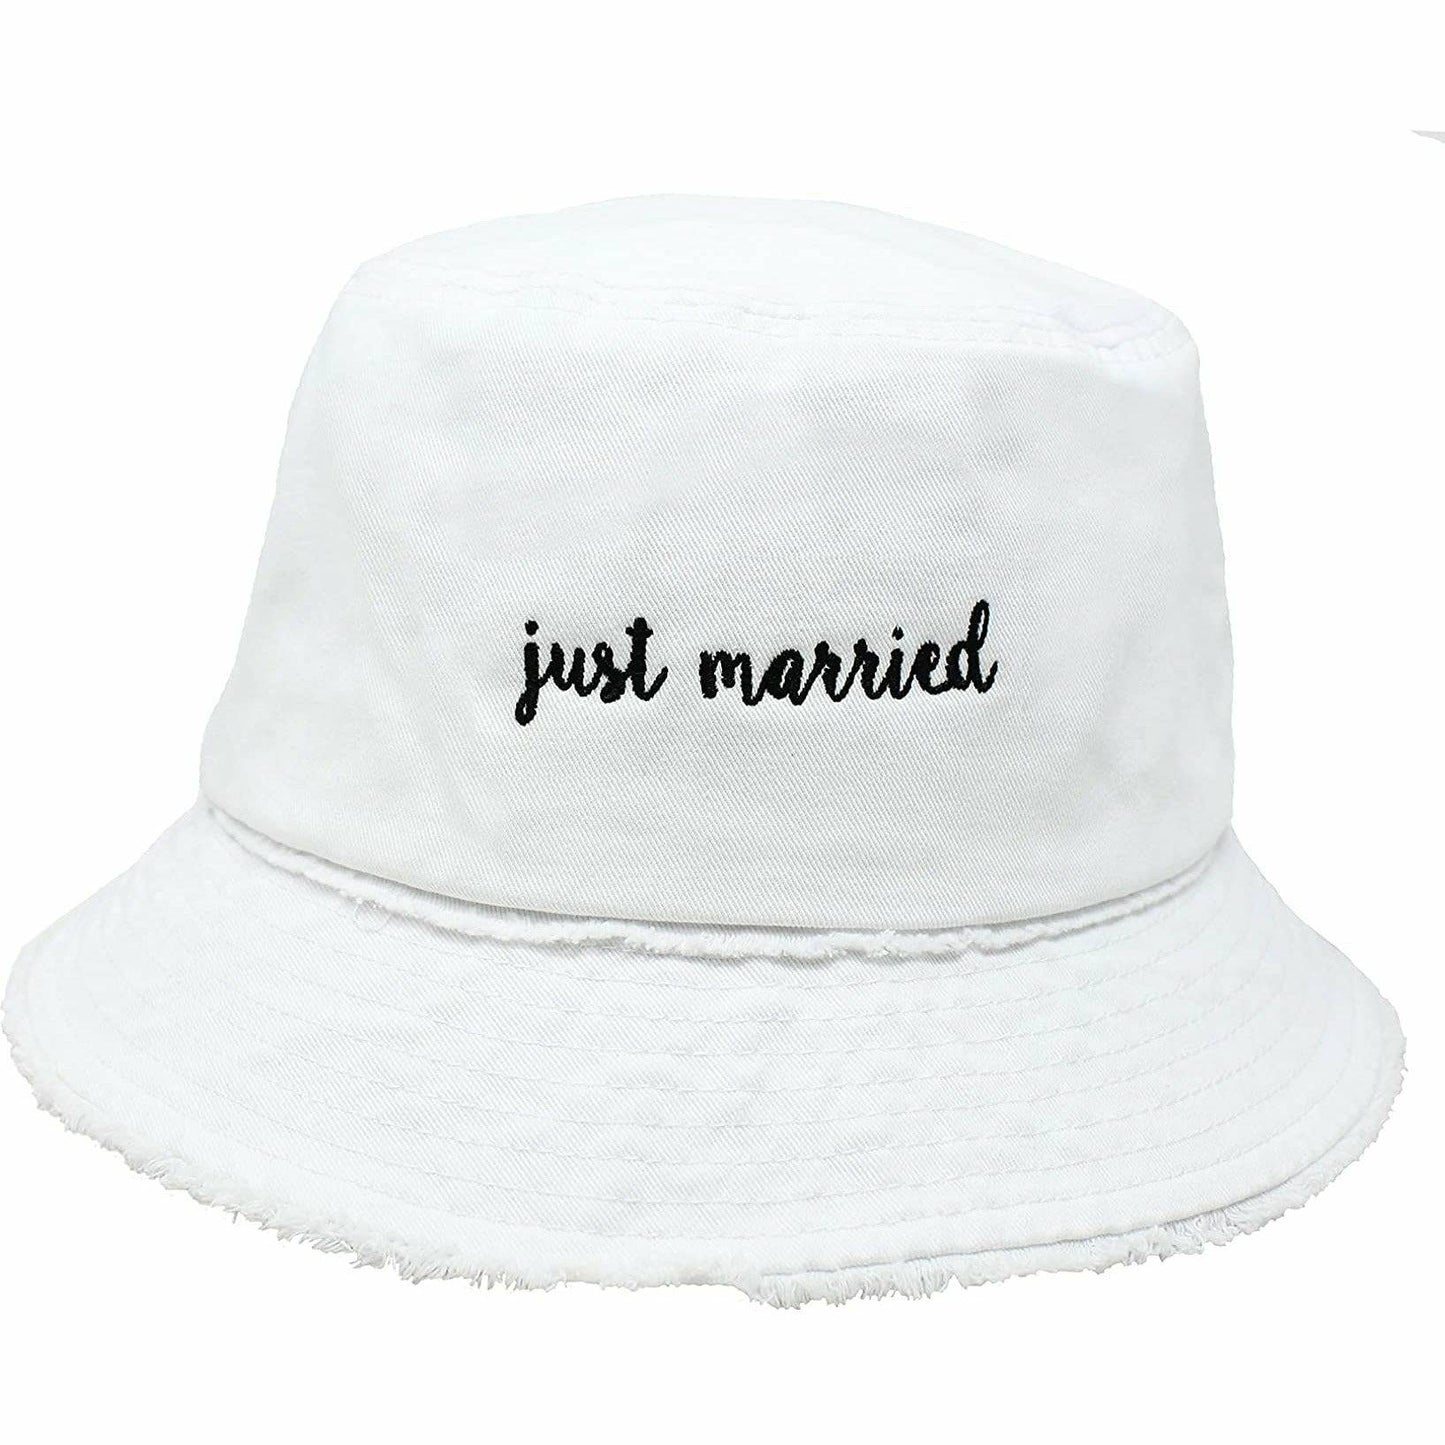 Embroidered Bridal Bucket Hat